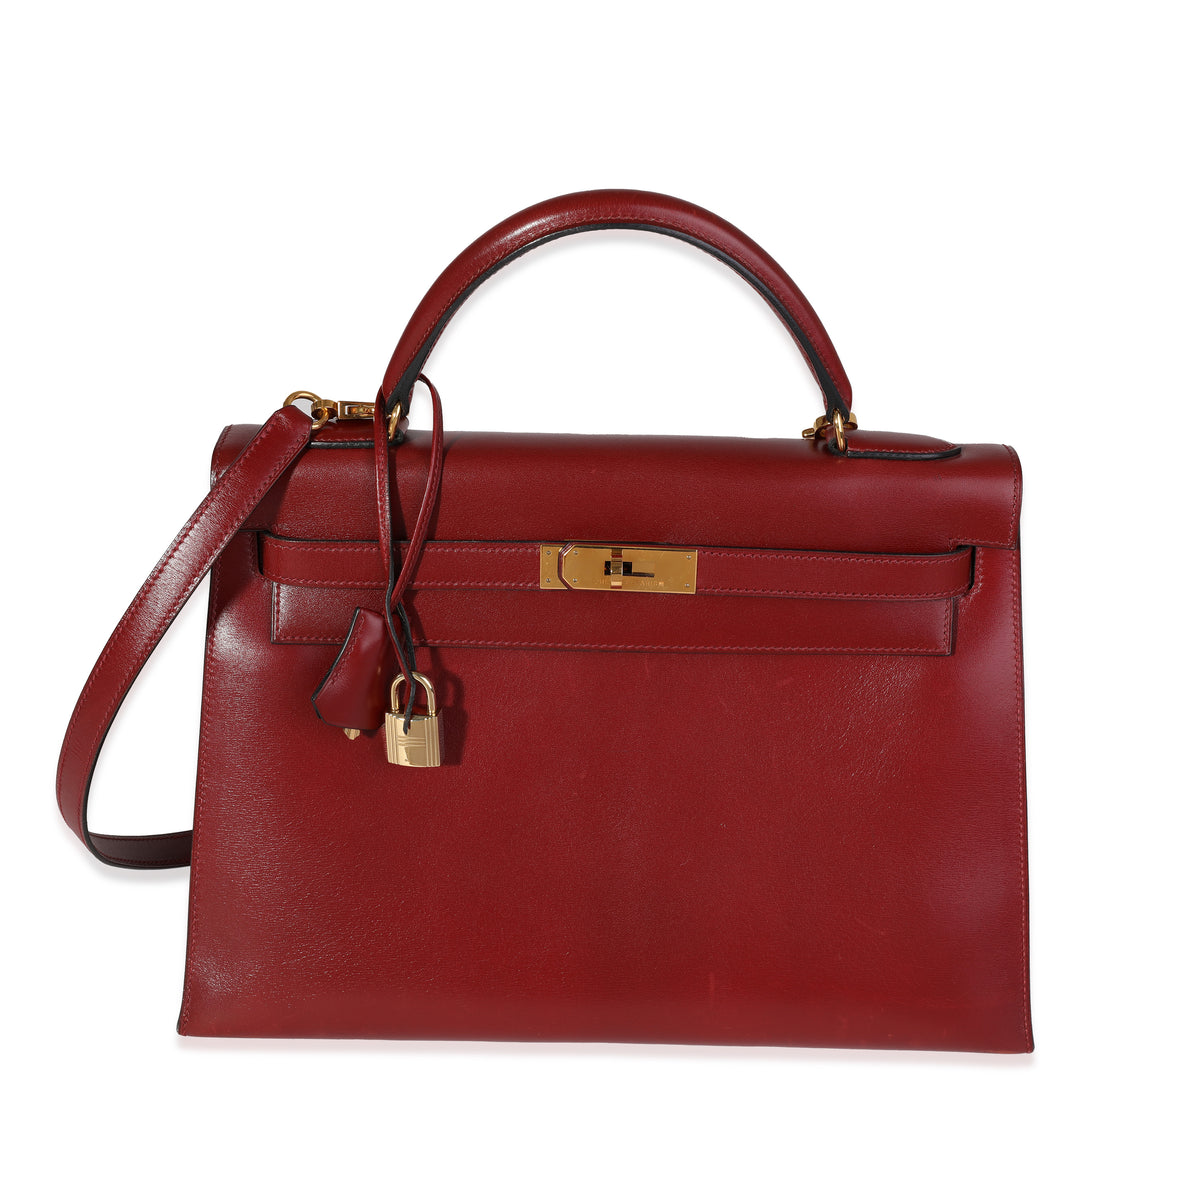 Kelly 32 bag in red leather